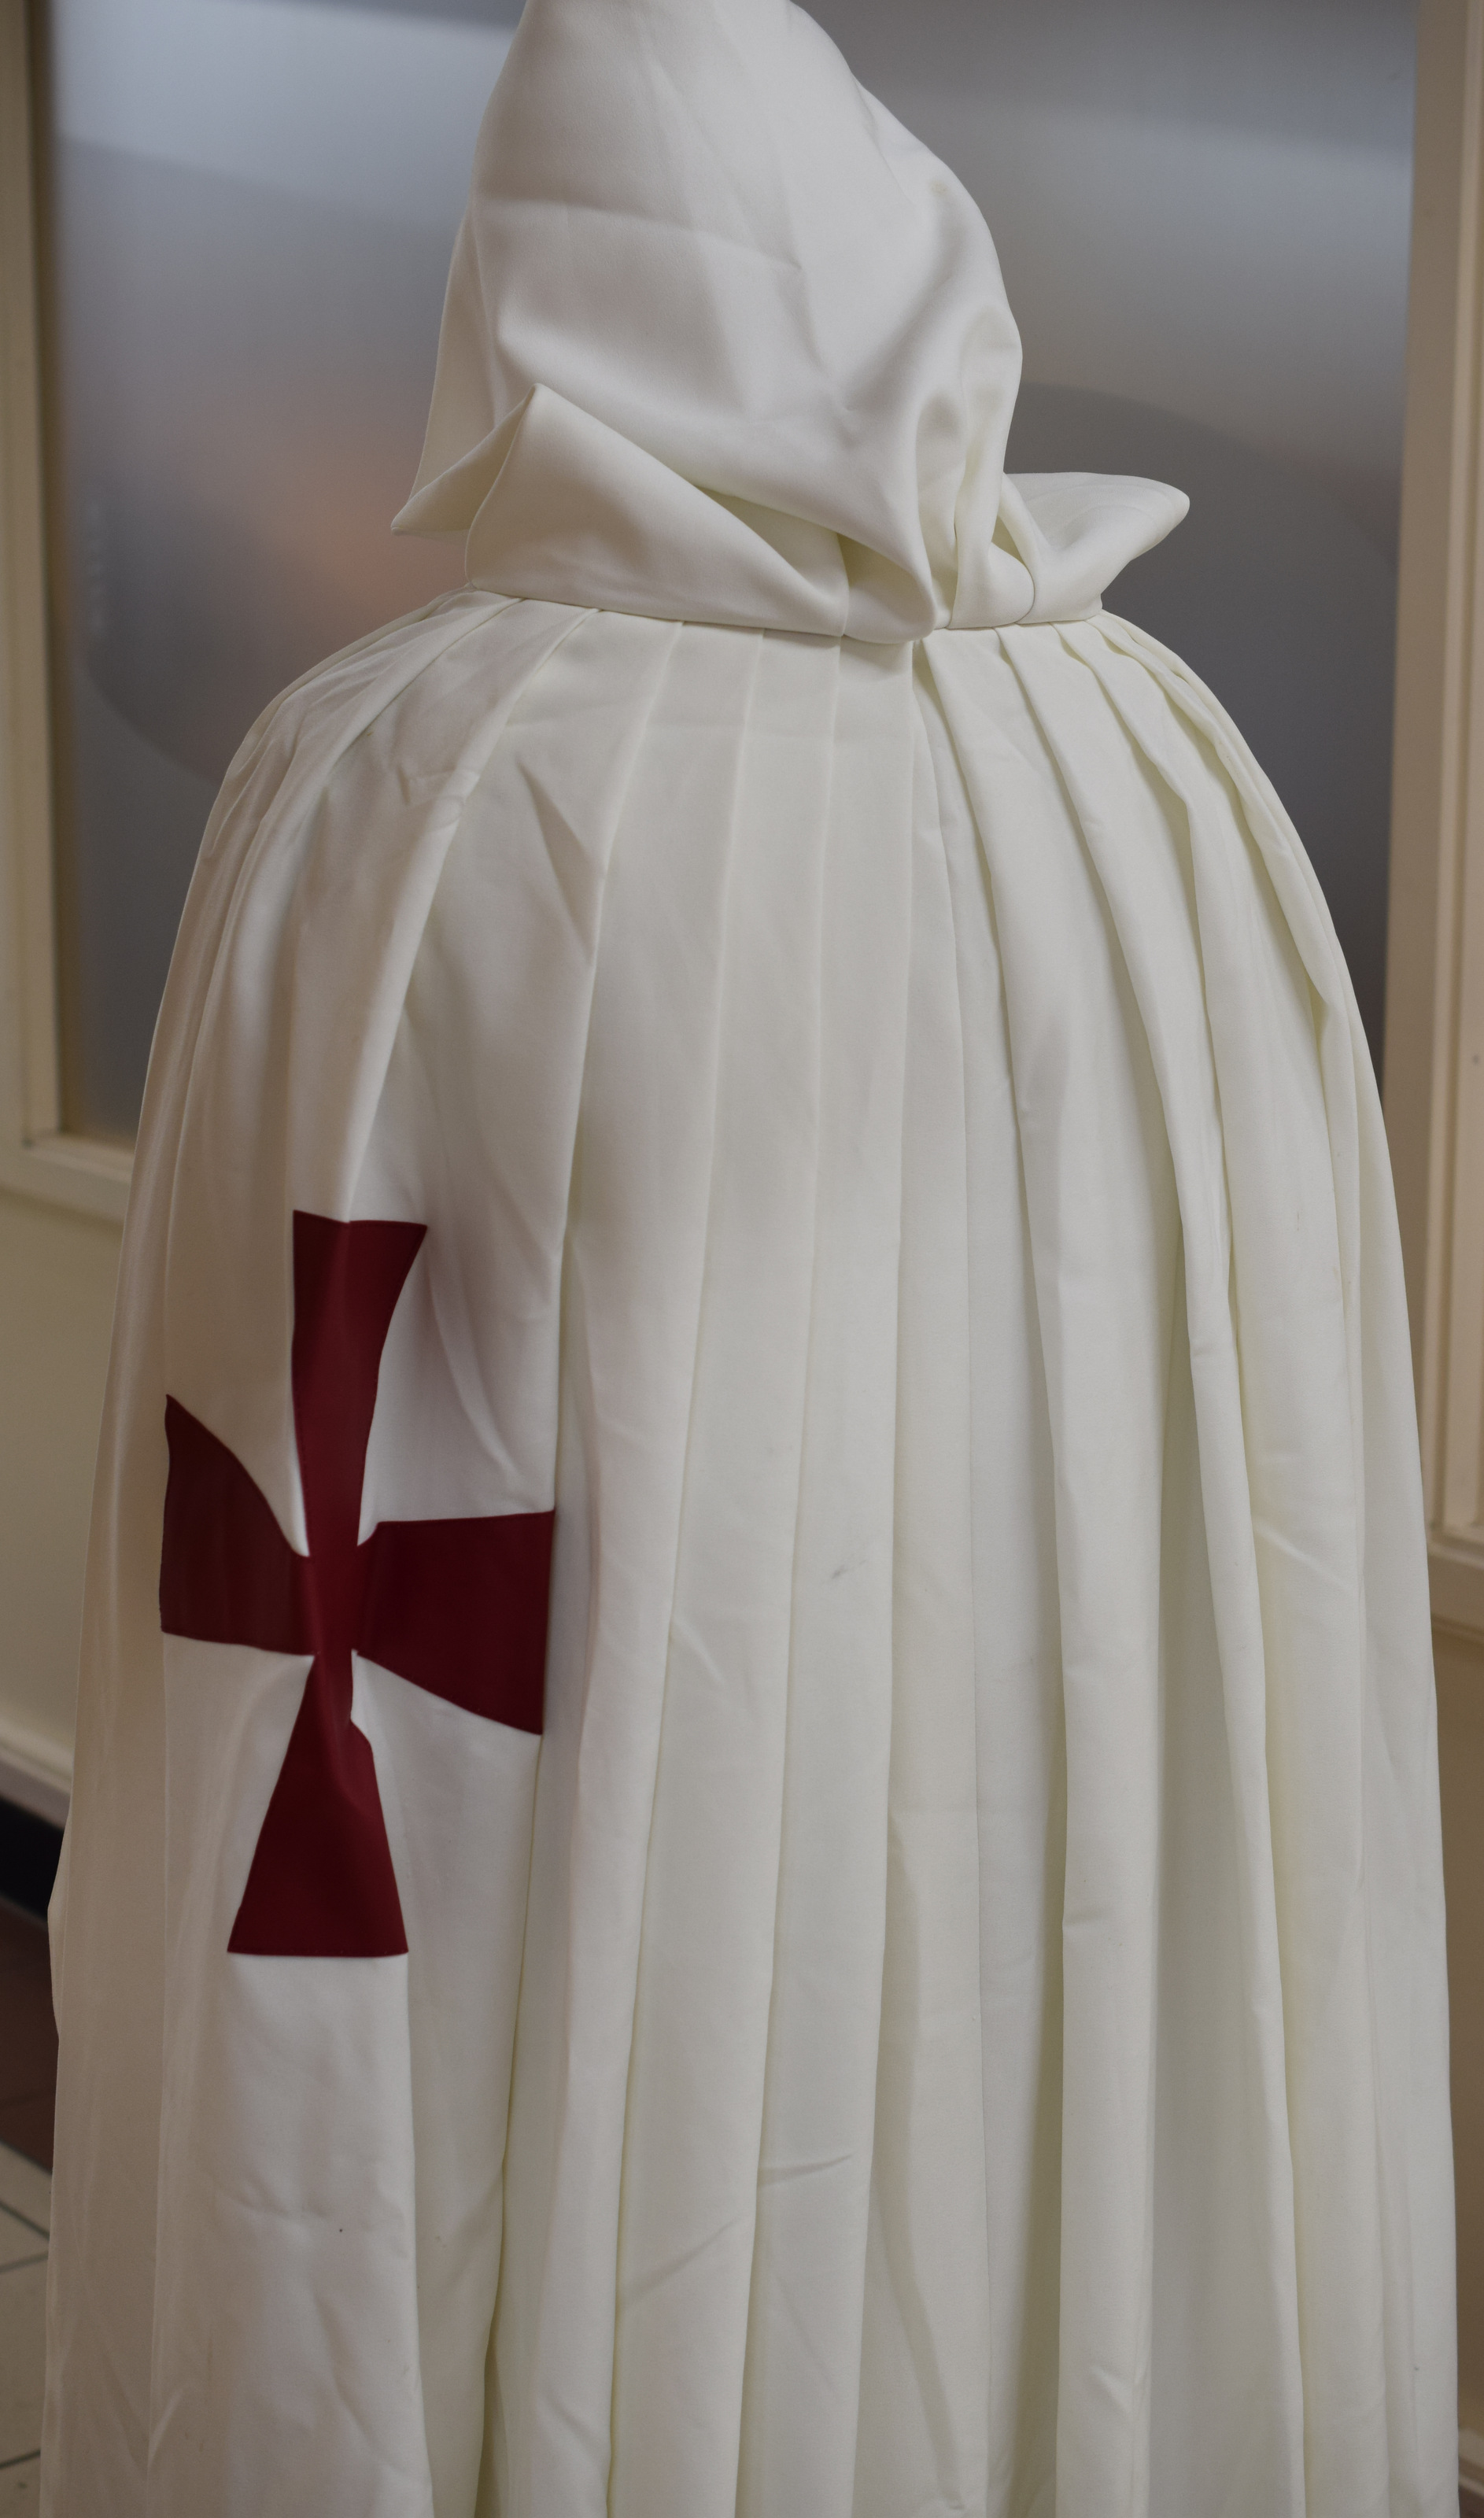 Knights Templar Robes - Image 2 of 3